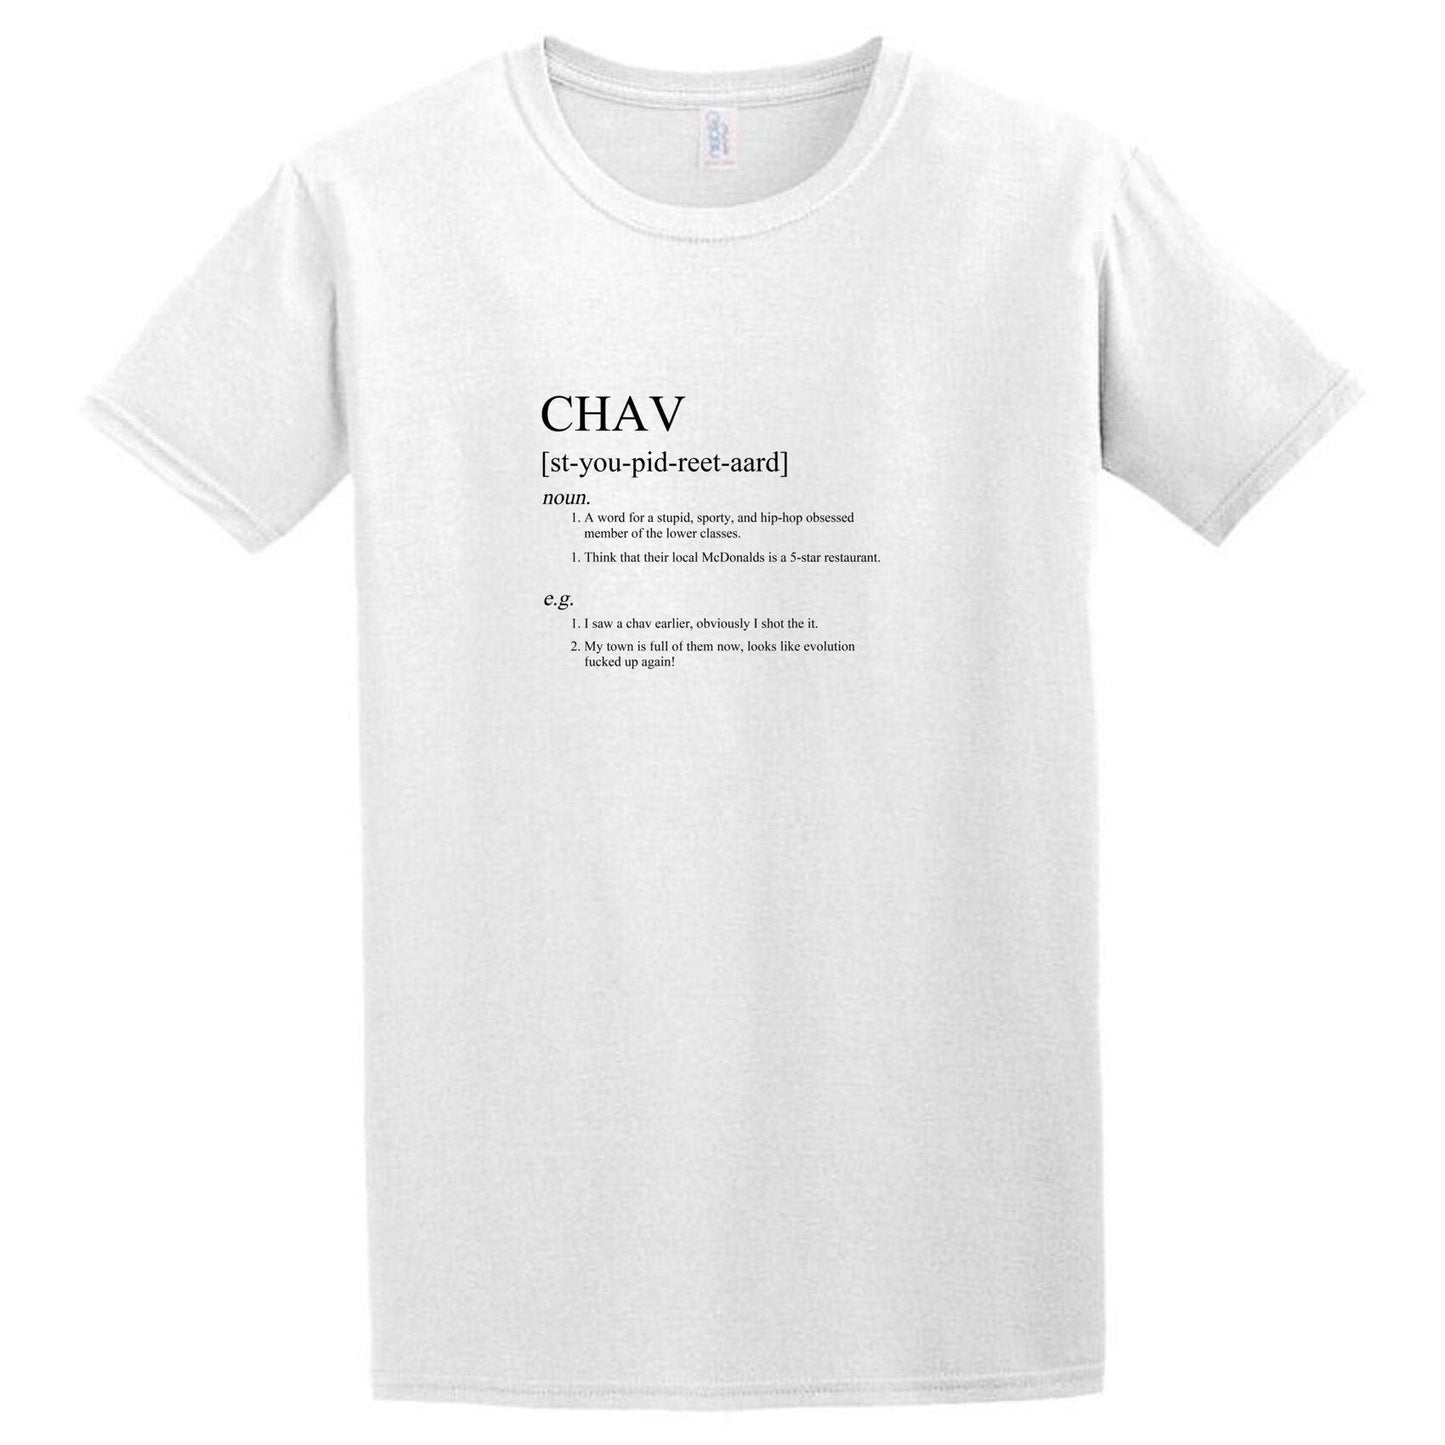 A white Chav T-Shirt with the word vad on it. Brand: Twisted Gifts.